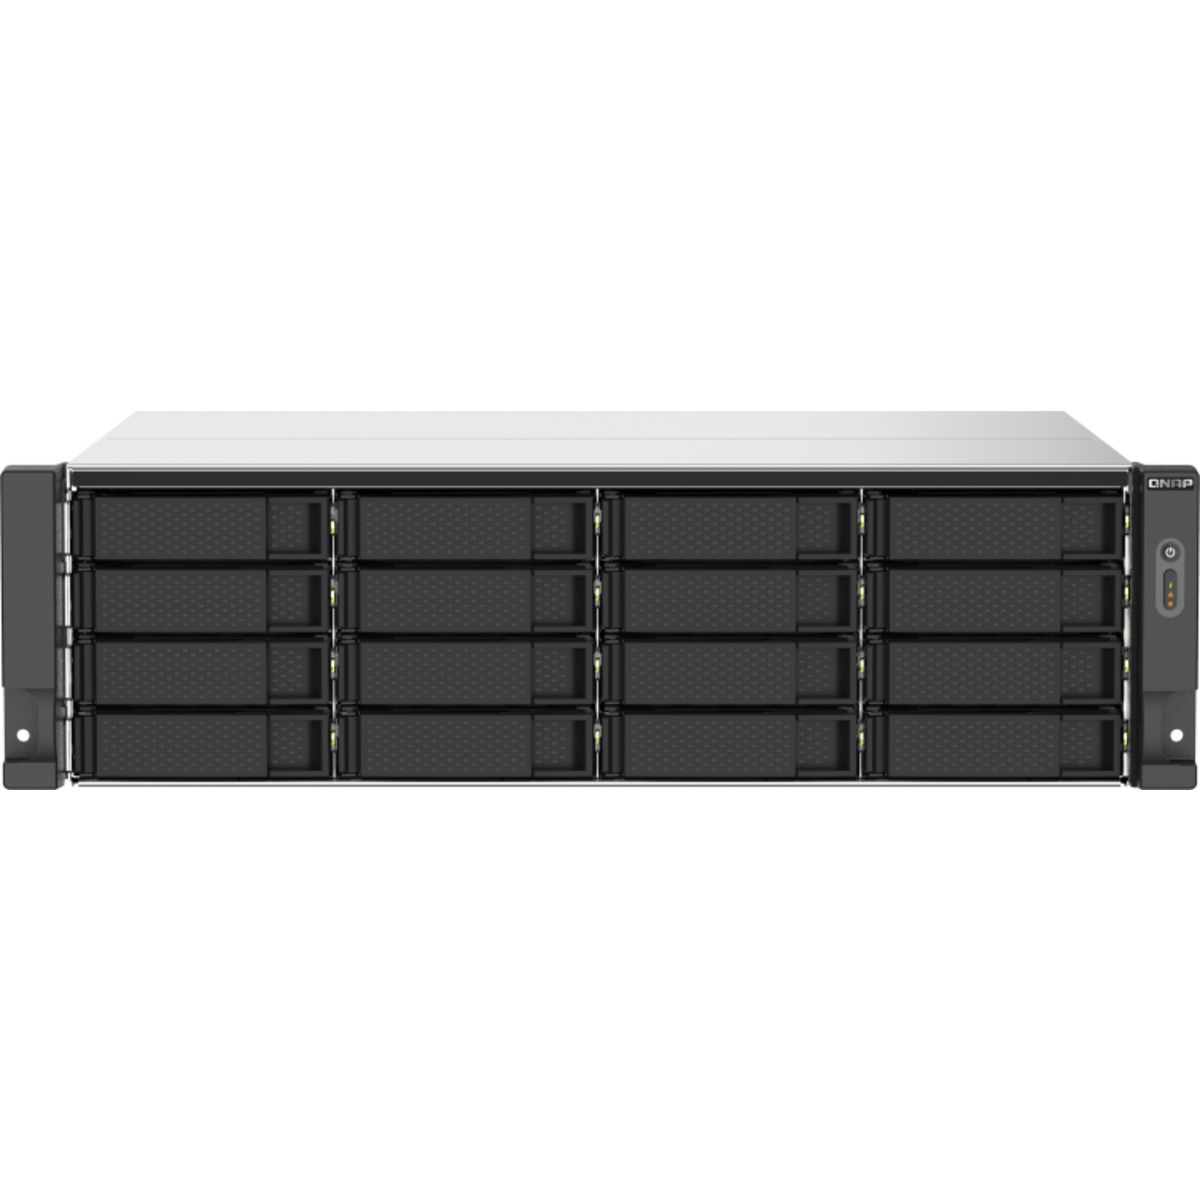 QNAP TS-1673AU-RP 256tb 16-Bay RackMount Multimedia / Power User / Business NAS - Network Attached Storage Device 16x16tb Seagate EXOS X18 ST16000NM000J 3.5 7200rpm SATA 6Gb/s HDD ENTERPRISE Class Drives Installed - Burn-In Tested - FREE RAM UPGRADE TS-1673AU-RP